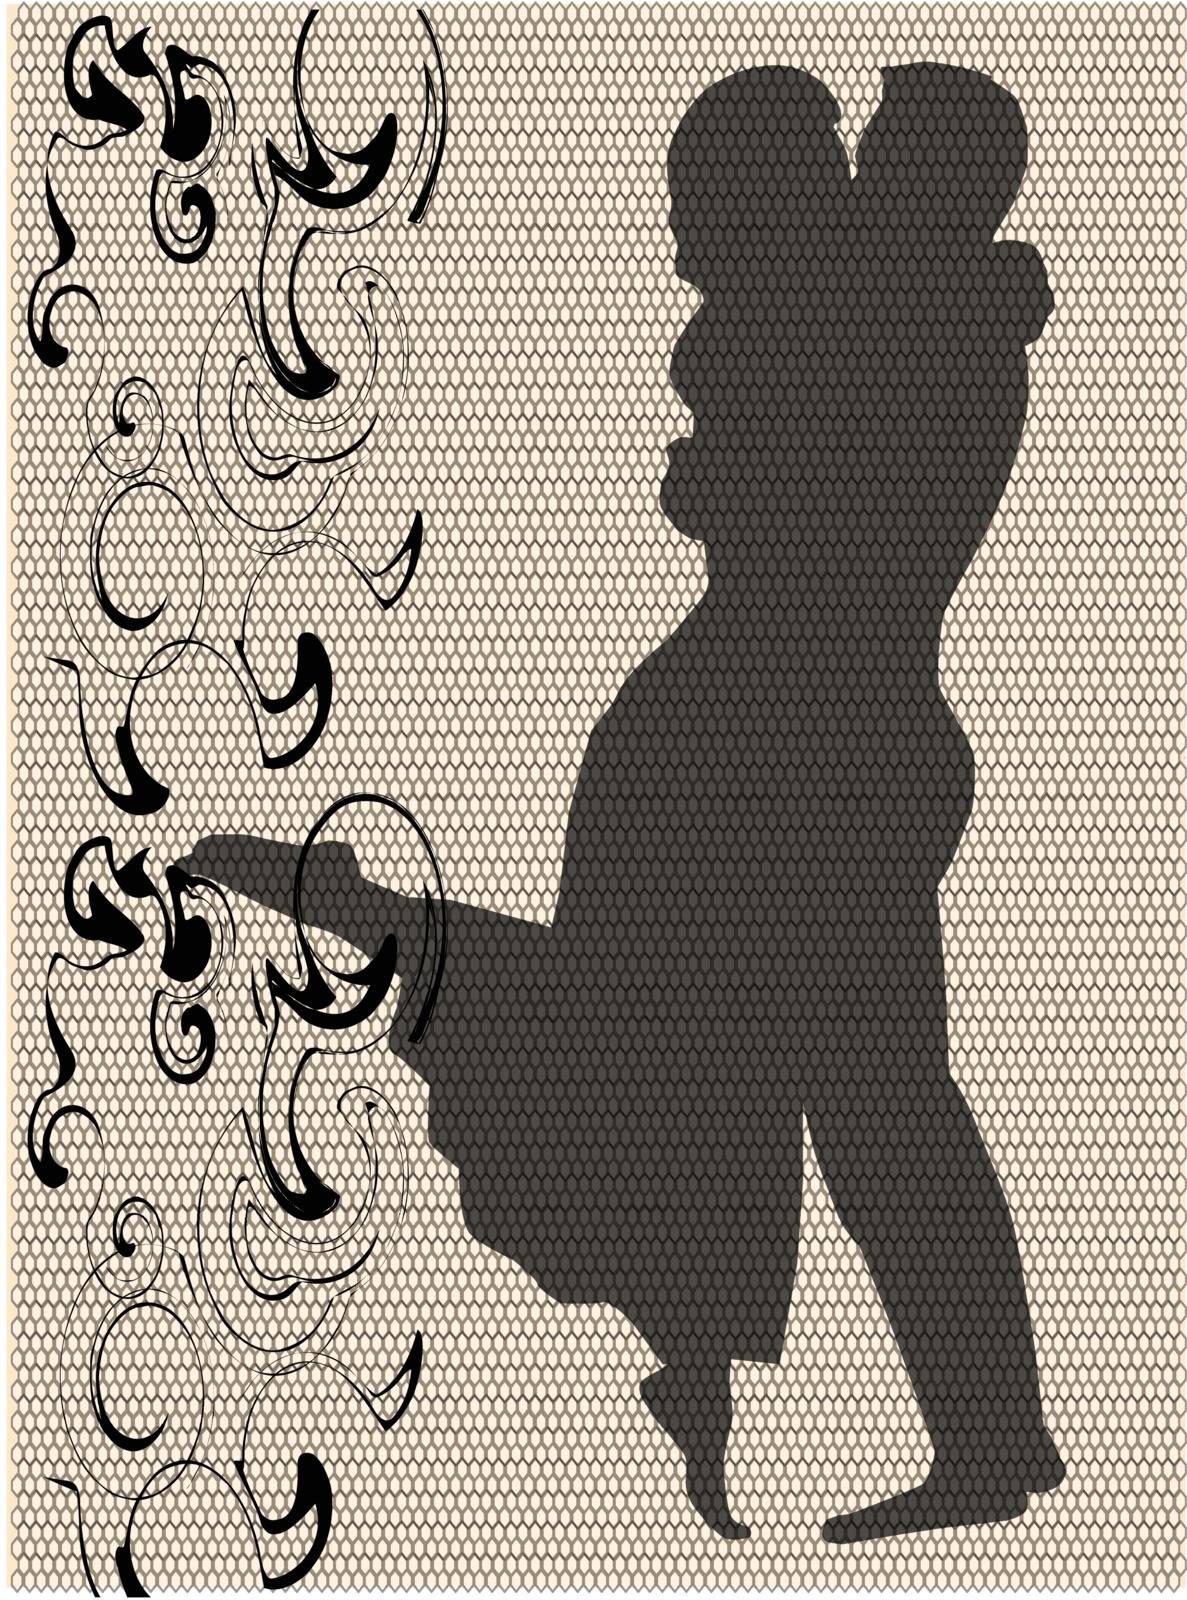 Lovers kissing over a lace stocking background